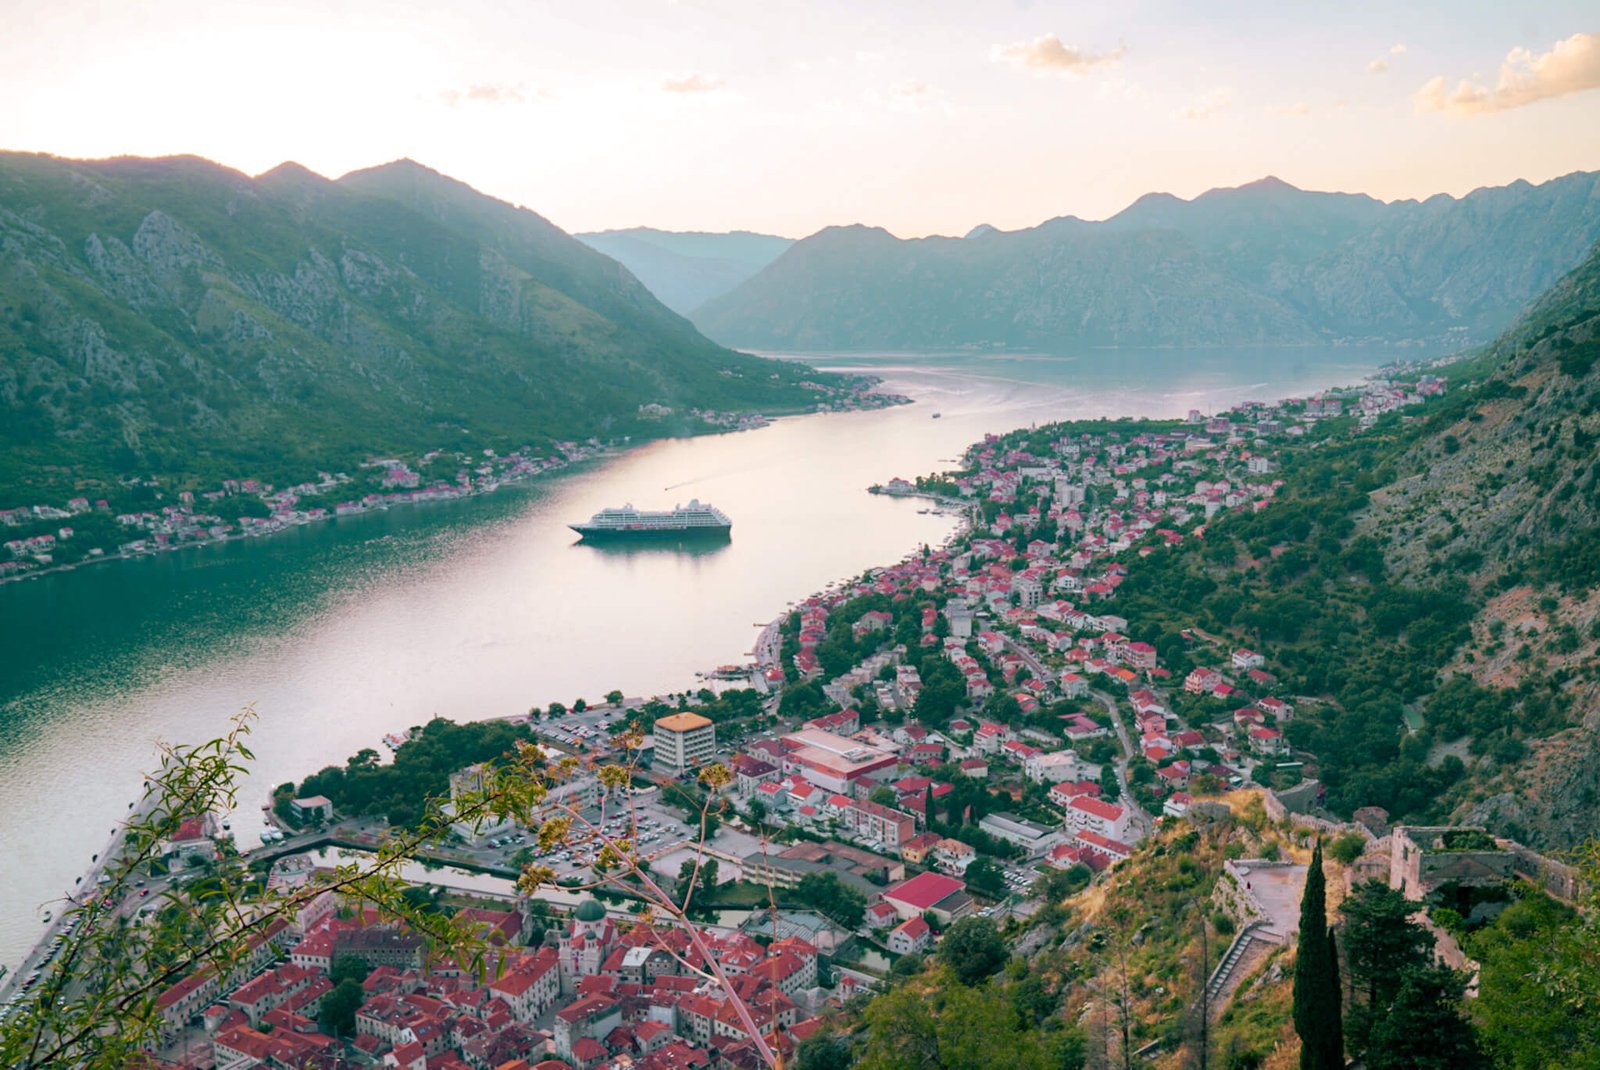 Kotor, Monegro, What Countries Were the Balkans